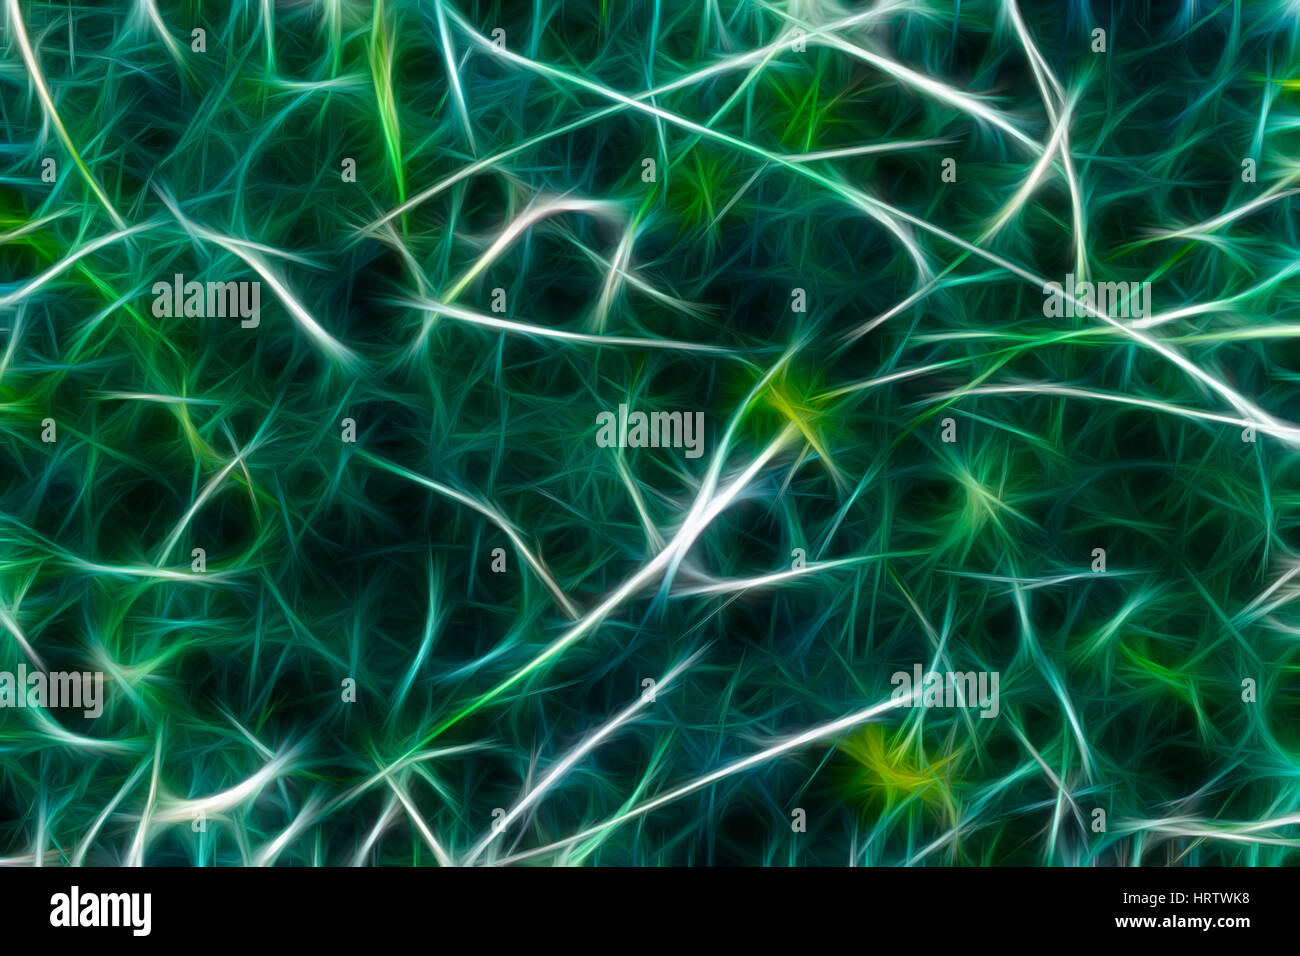 Neural network background. Neurons connections painted different colors. Stock Photo